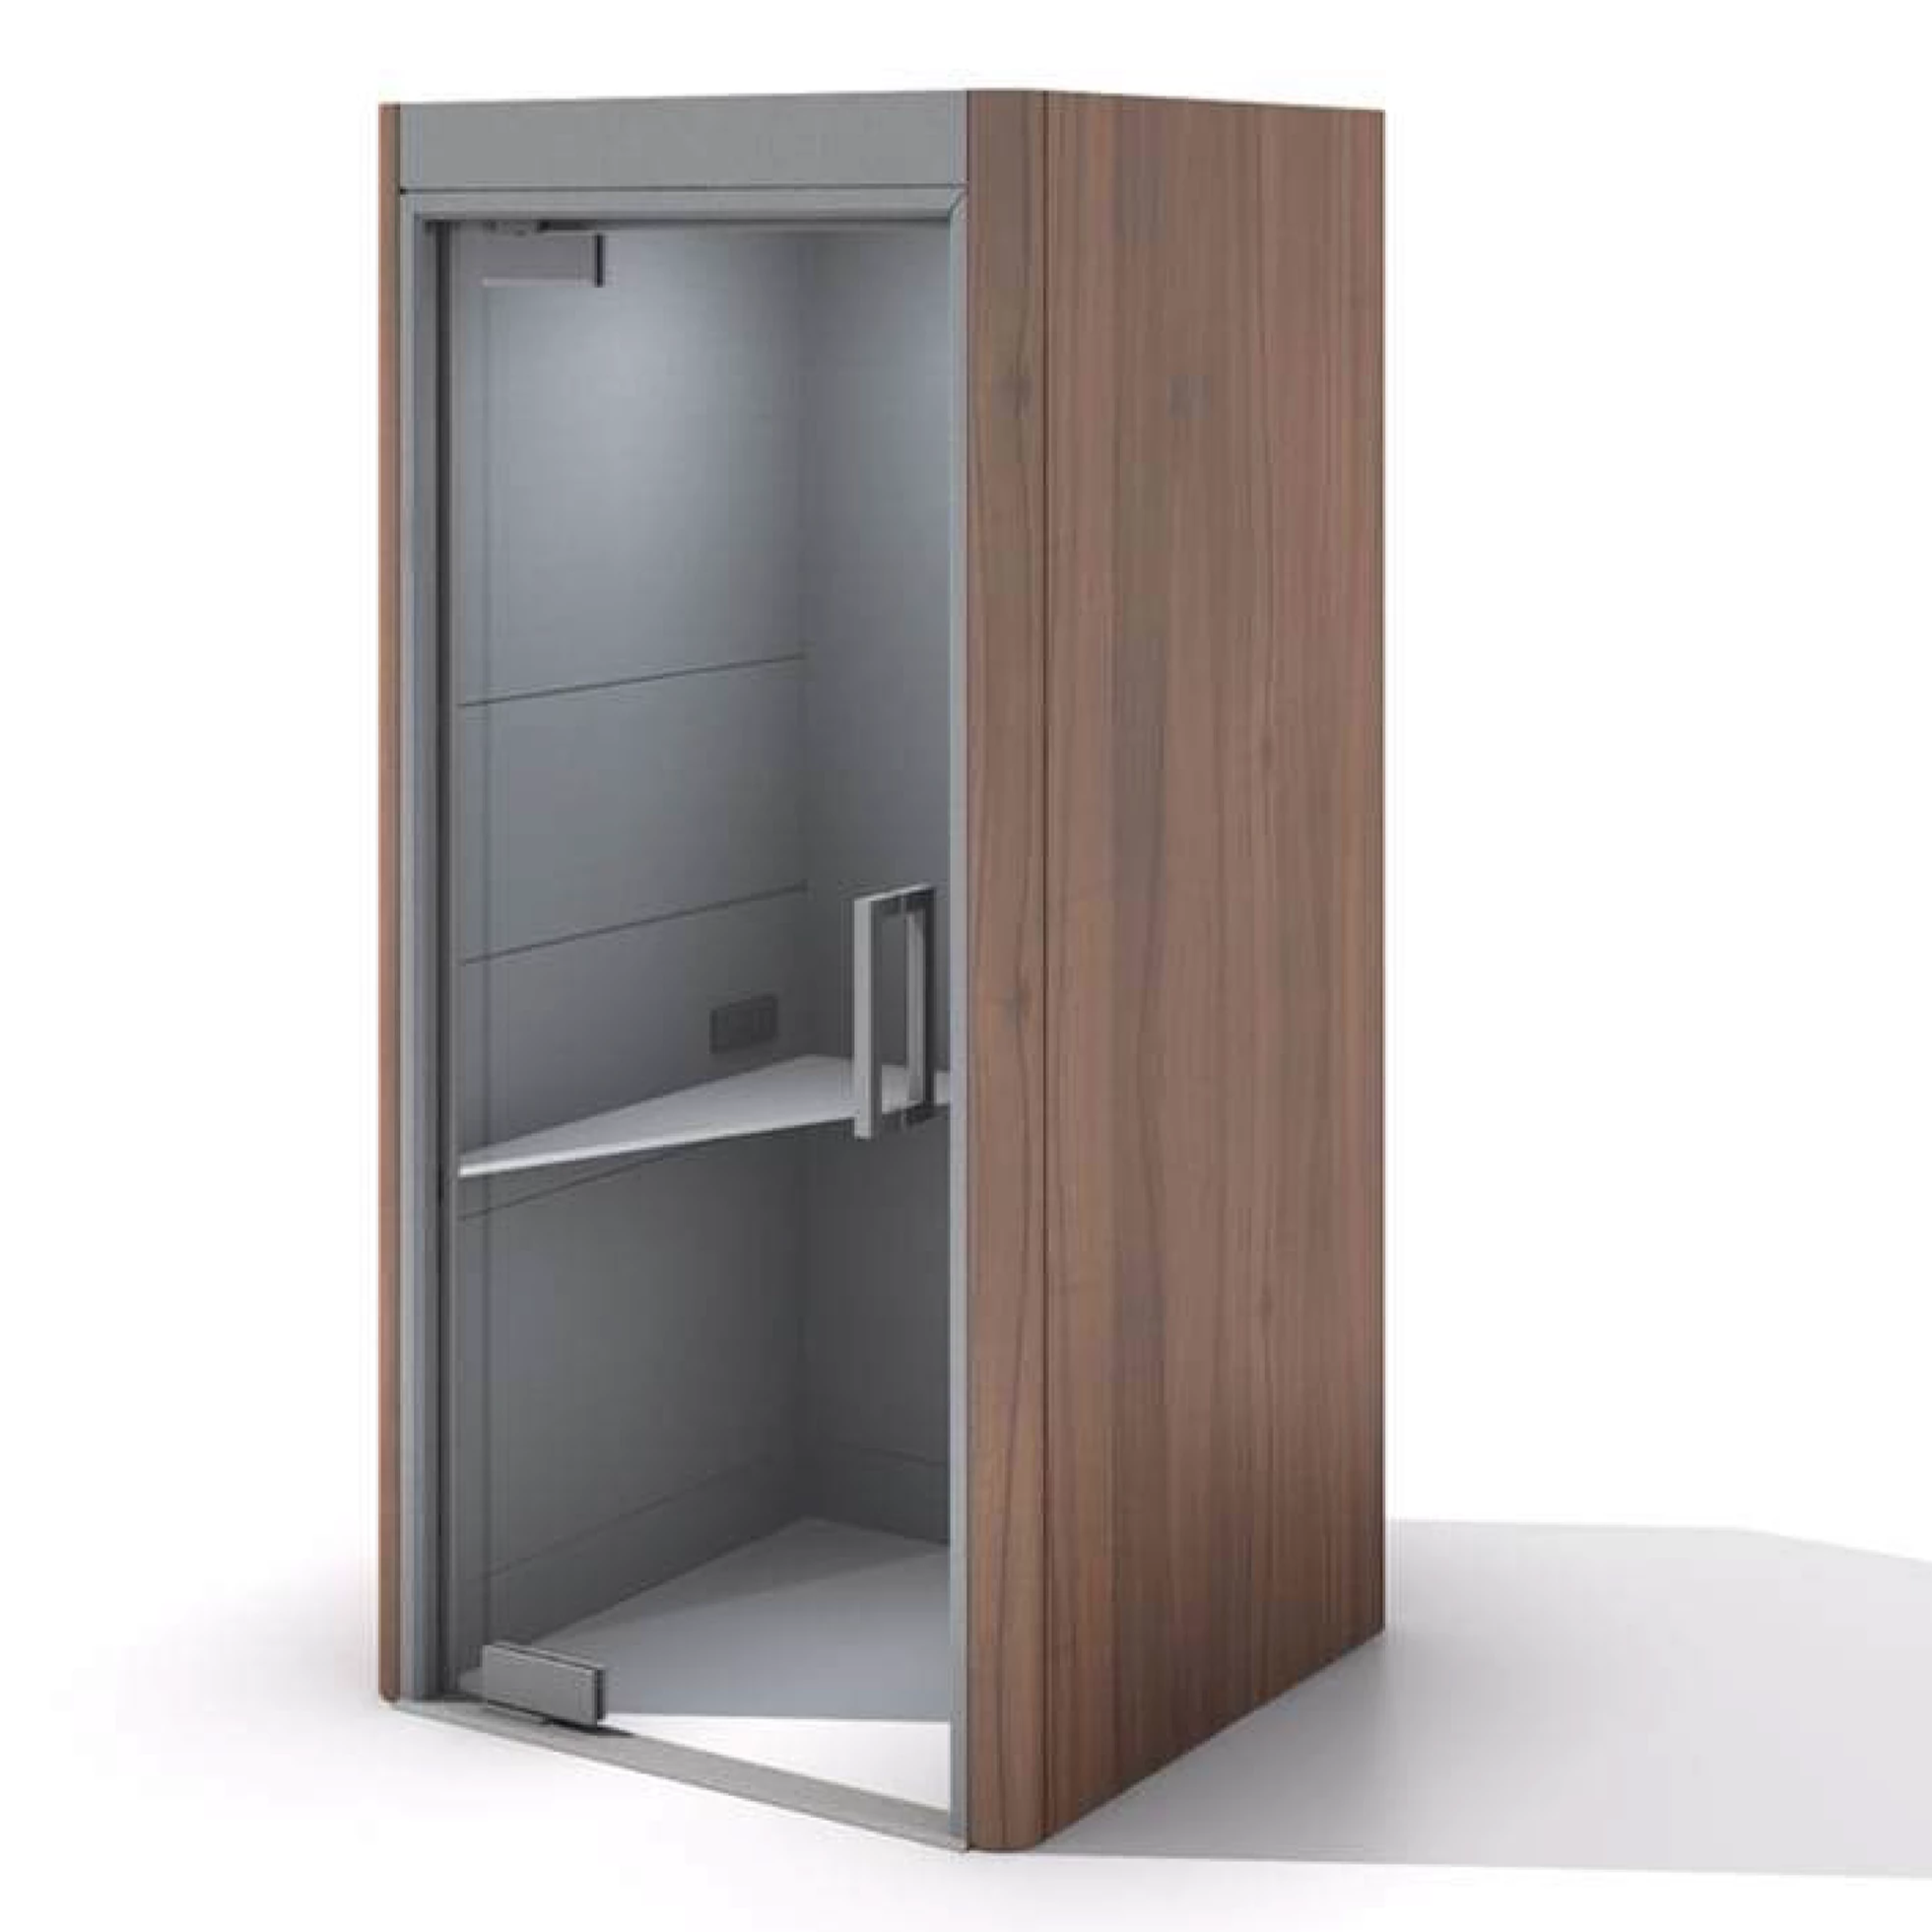 4 Person Phone Booth Affordable Office Pods Privacy Booth for Open Office，Europe France, Germany, Spain, Ireland, Italy, Netherlands